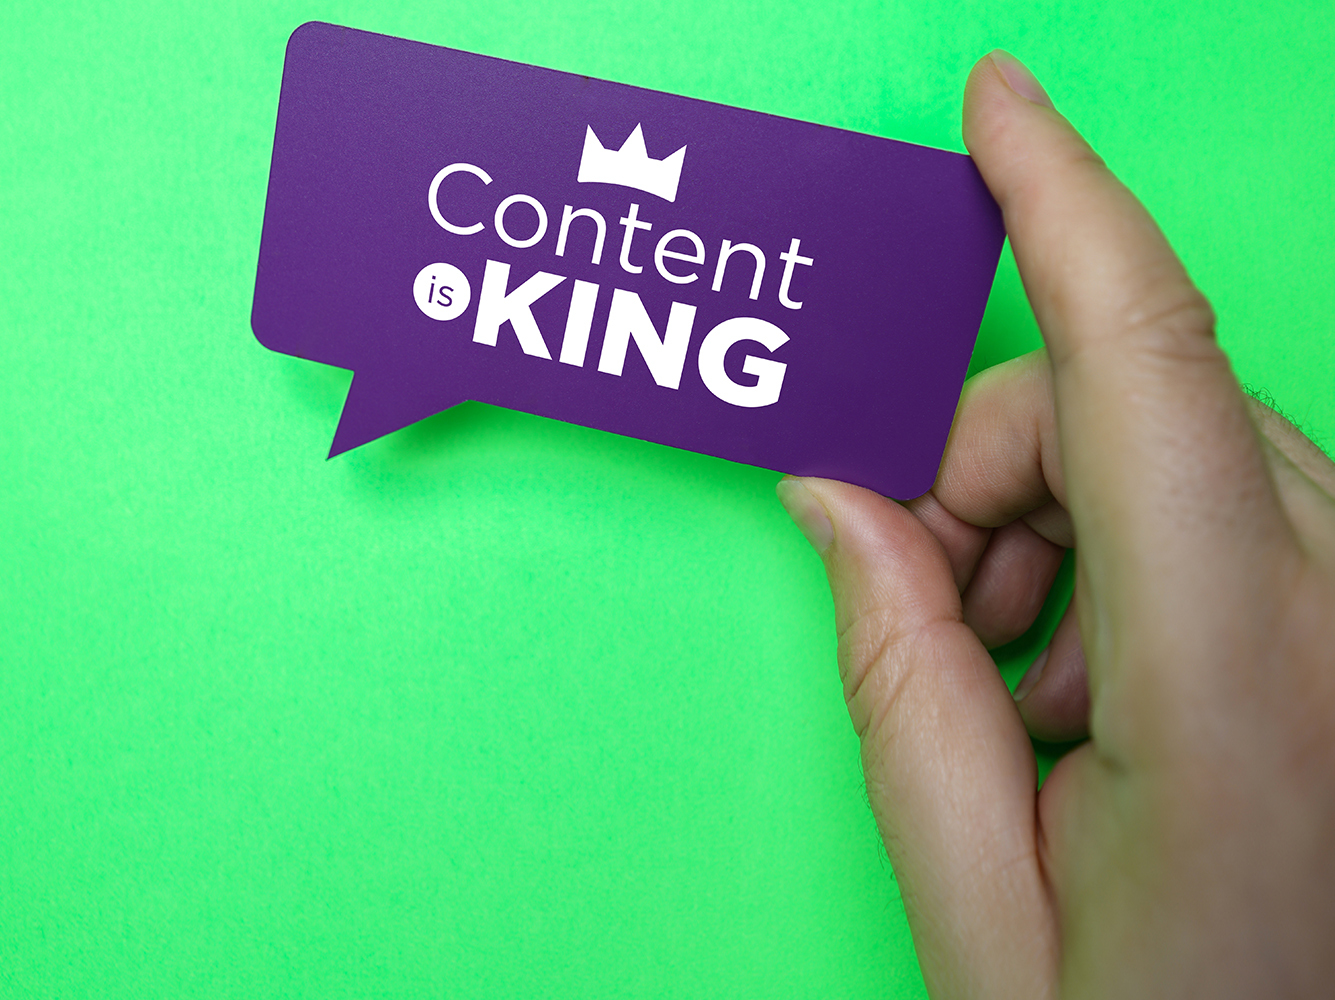 Heading for Why Content Creation is King?